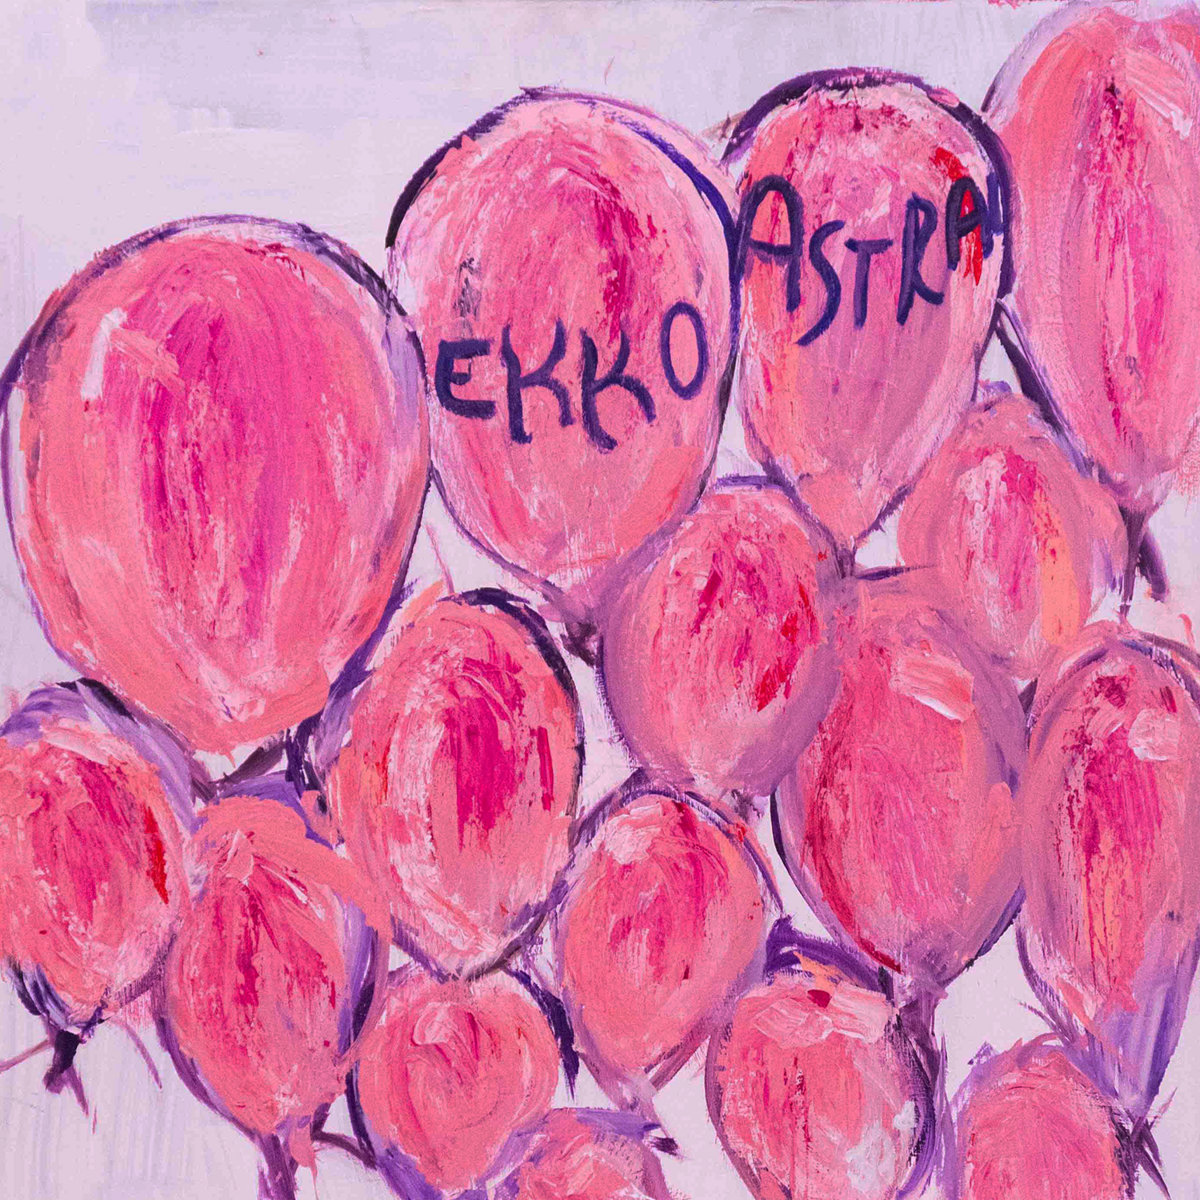 A couple @topshelfrecords albums are set for review in Rantipole #1: @Elephant_Gym's 'World' and @ekkoastral's 'pink balloons.'

PRE-ORDER RANTIPOLE: ko-fi.com/s/07c9526ceb